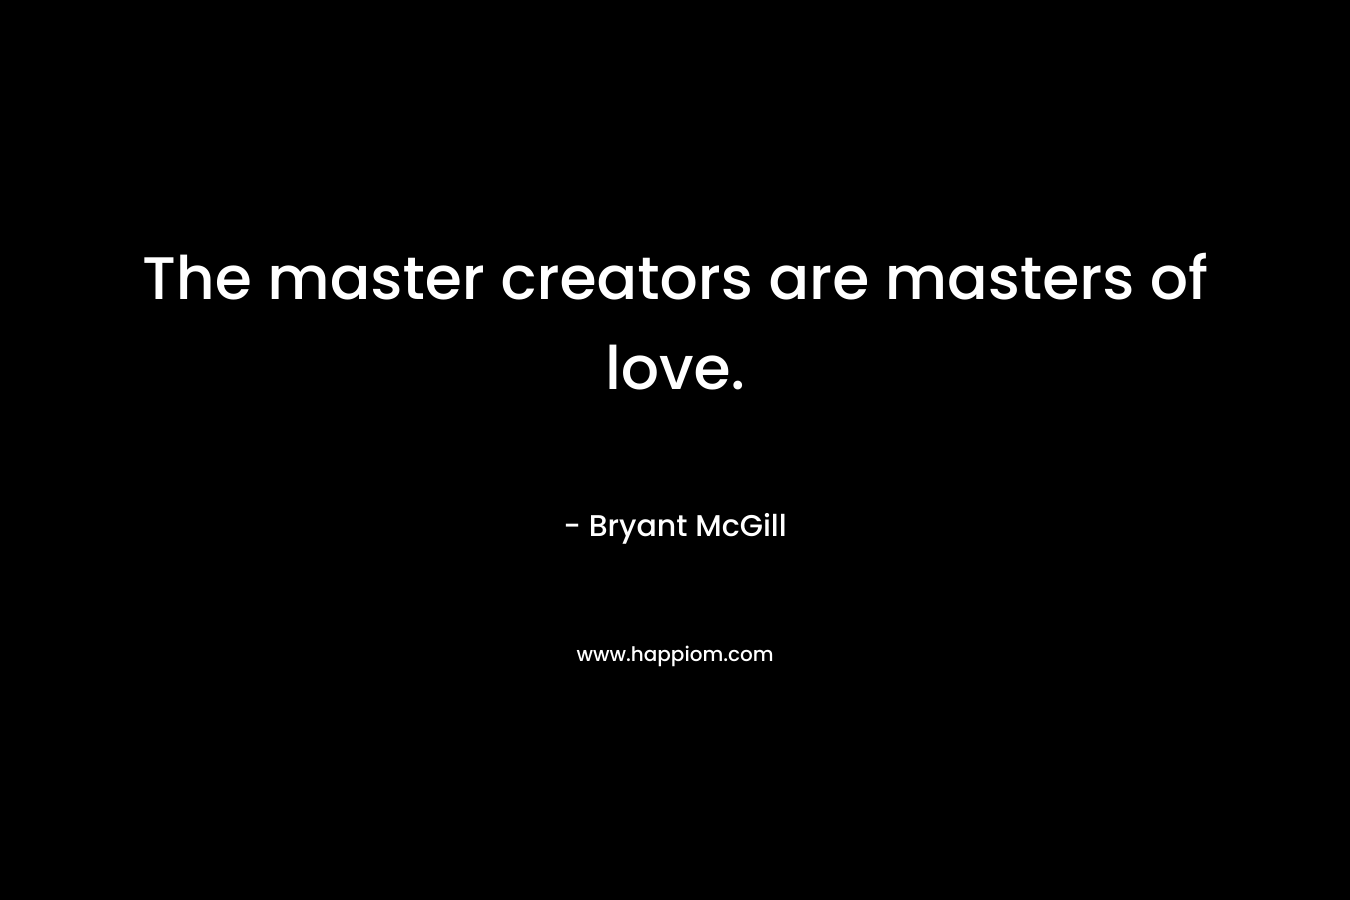 The master creators are masters of love.